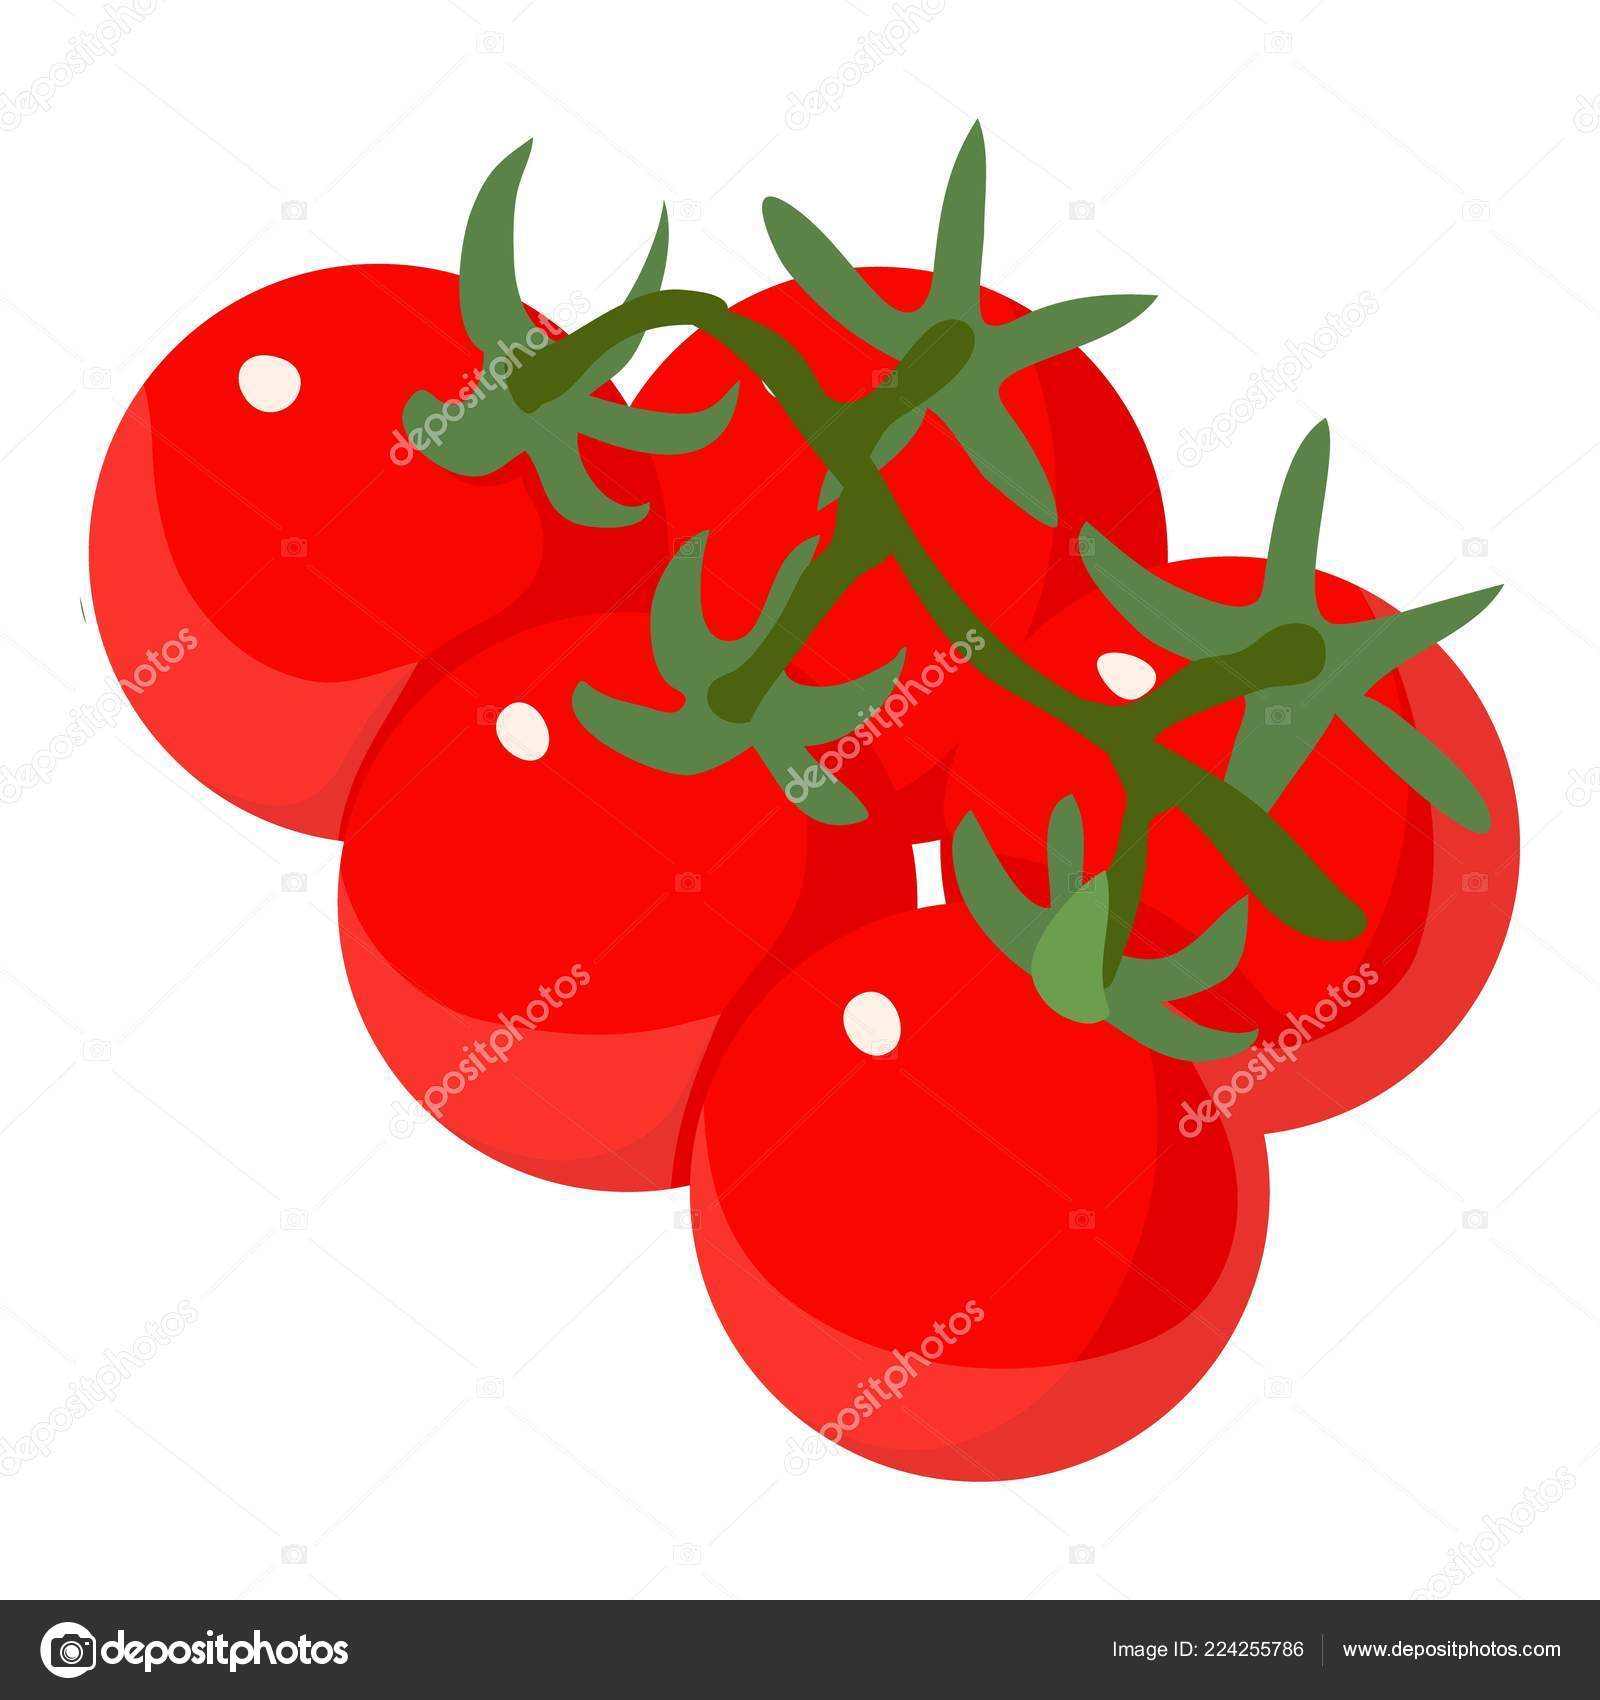 Tomato Icon Isometric 3d Style Vector Image By C Ylivdesign Vector Stock